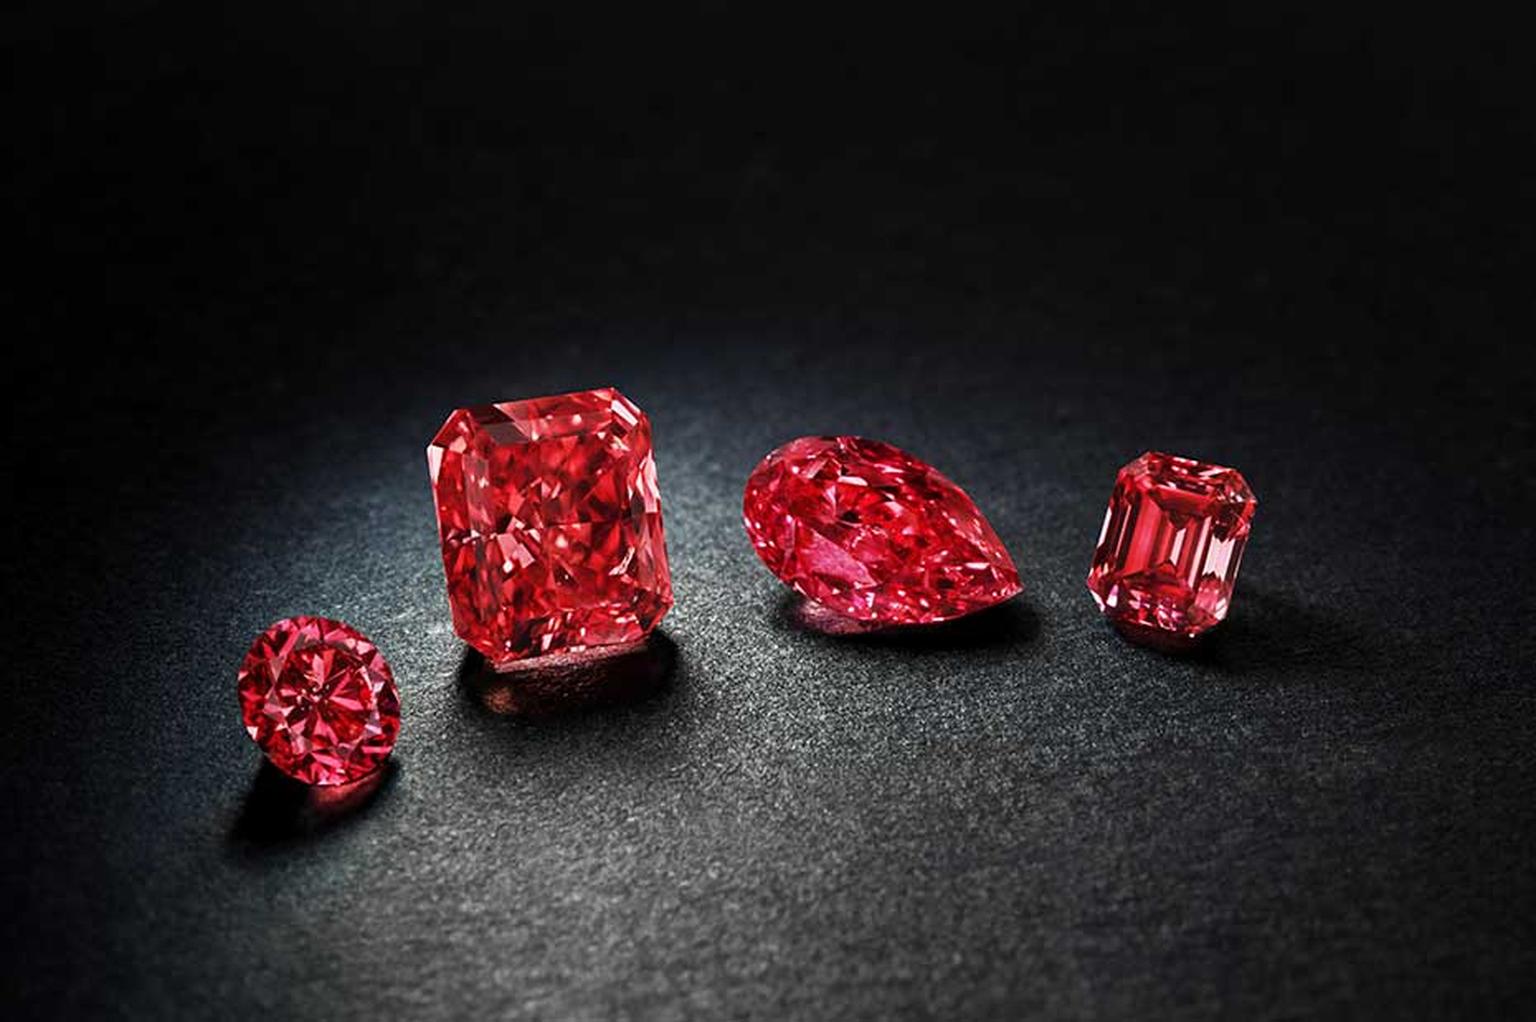 The Argyle Pink Diamonds 2014 Tender Fancy Red collection will be the highlight of Rio Tinto's annual Pink Diamonds Tender, which this year comprises 55 diamonds.